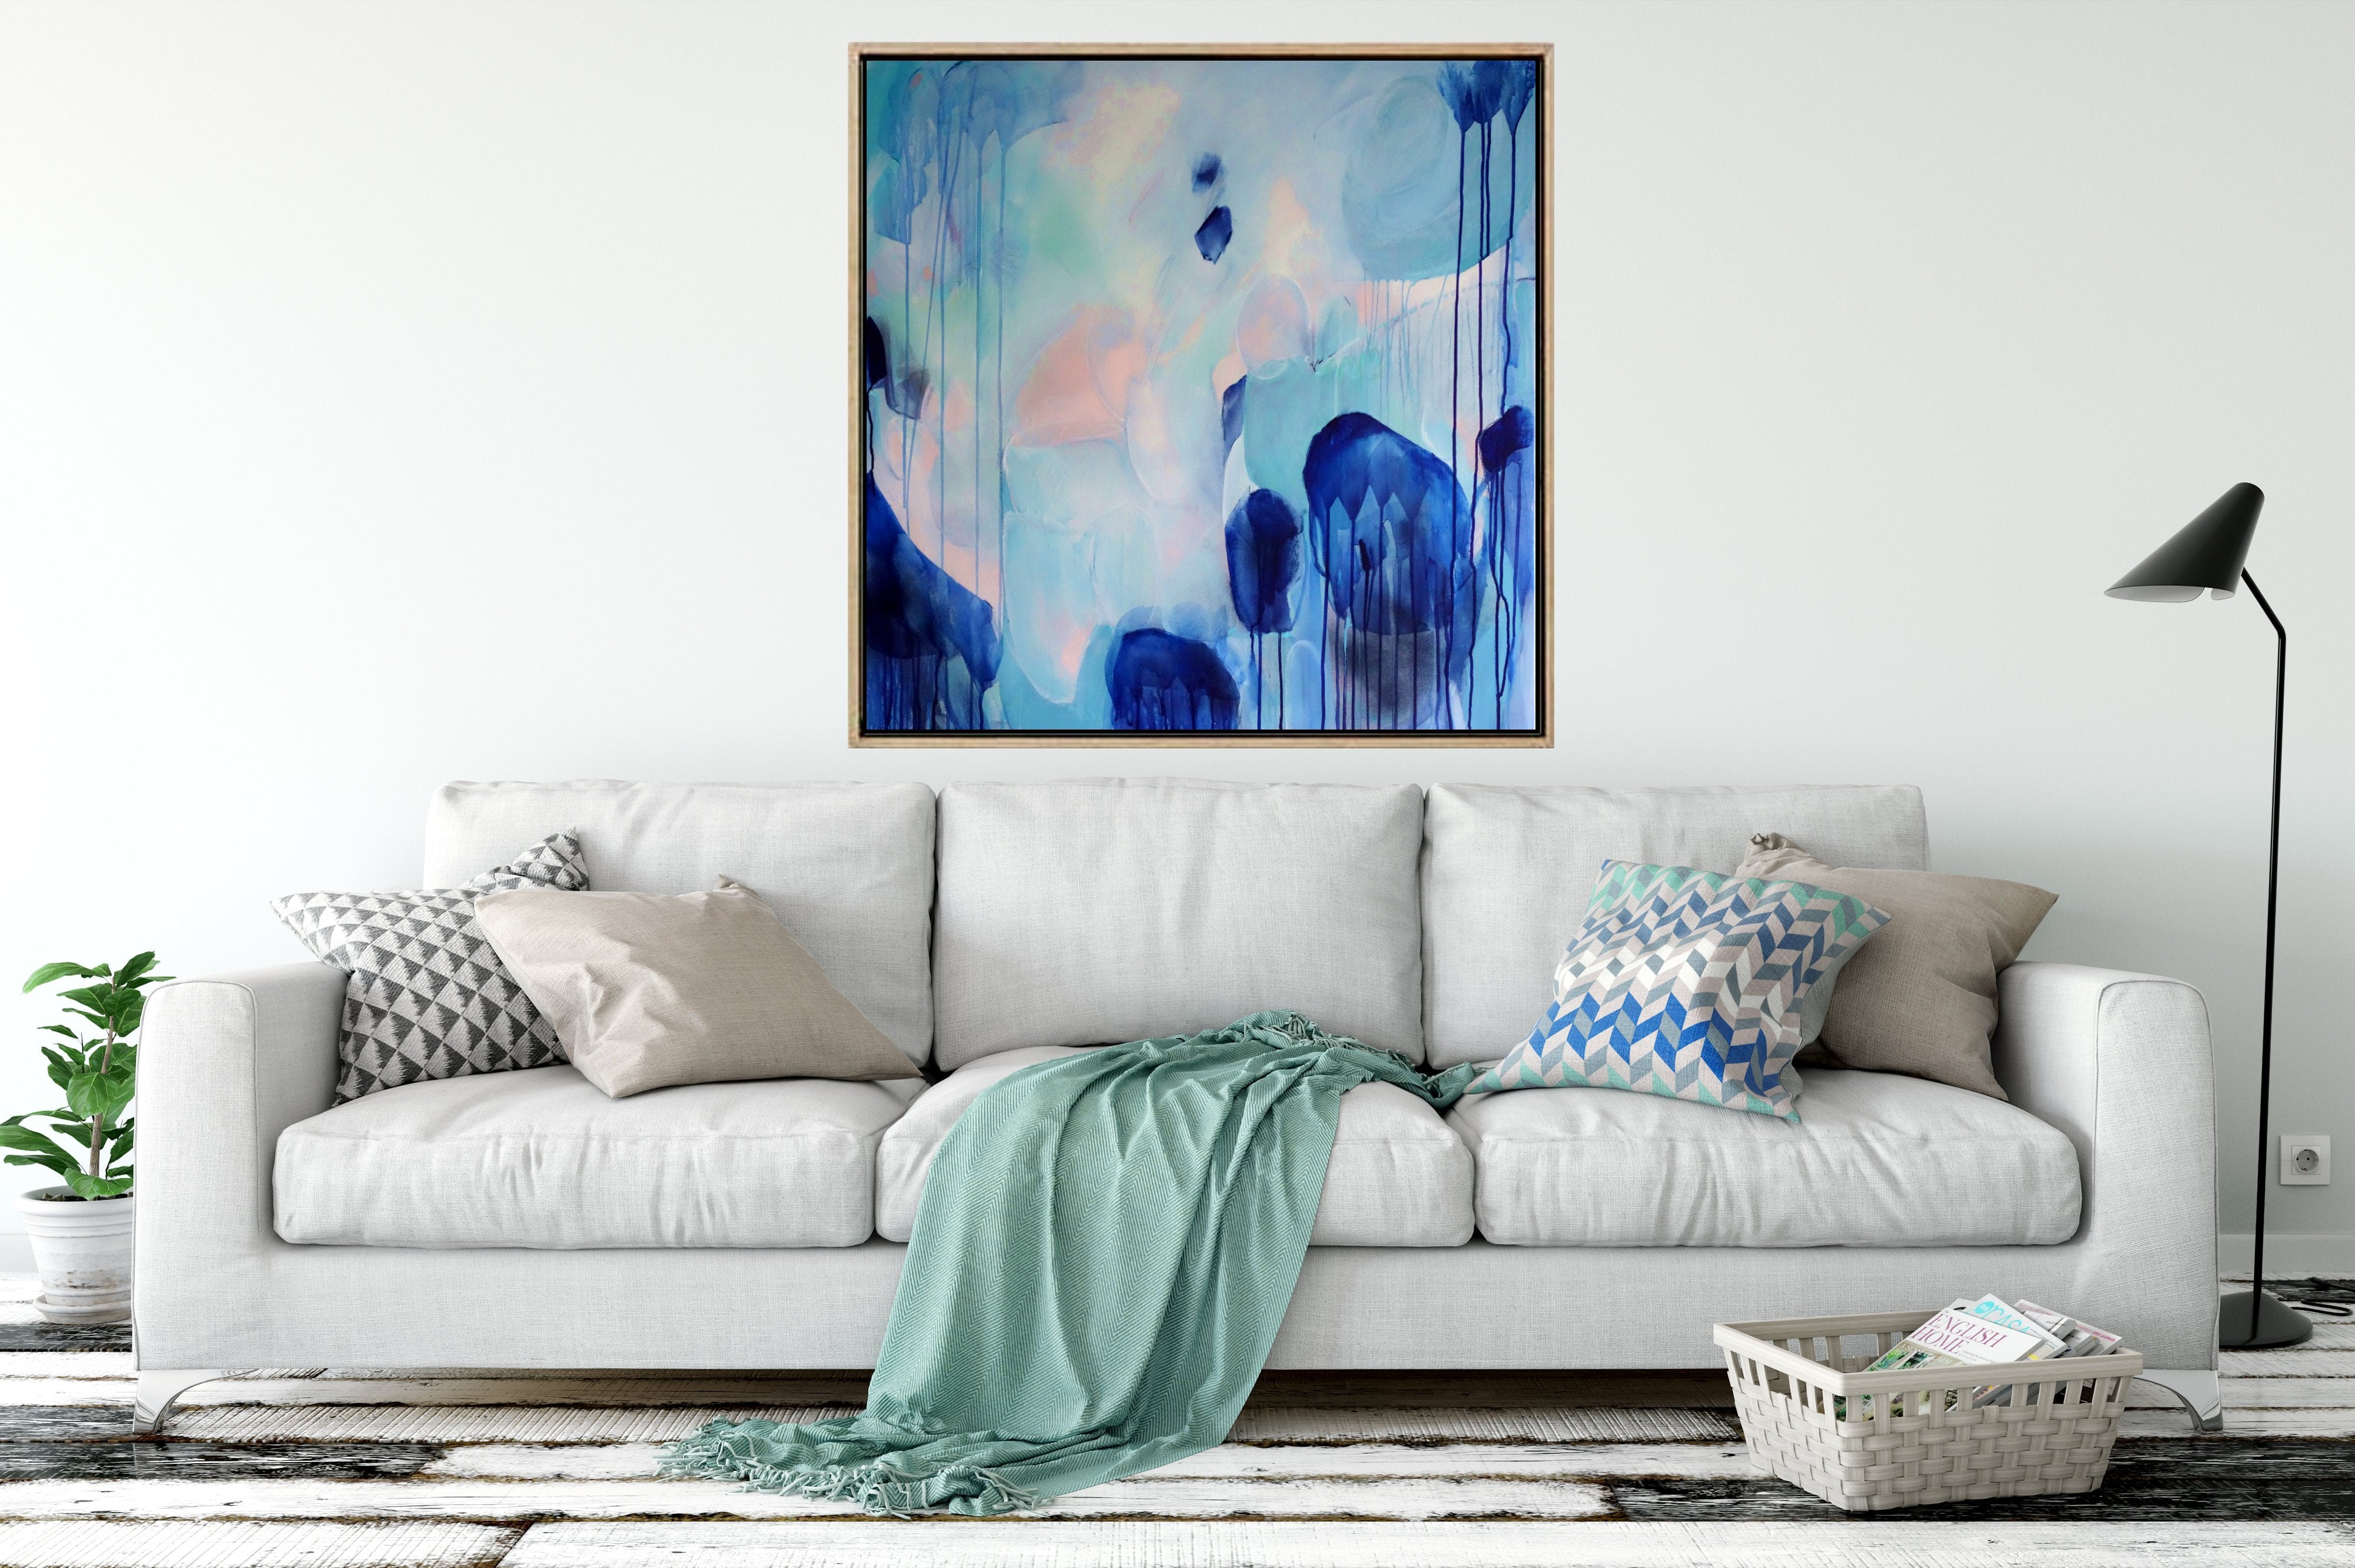 Dancing With Medusa - Fine Art Abstract Print